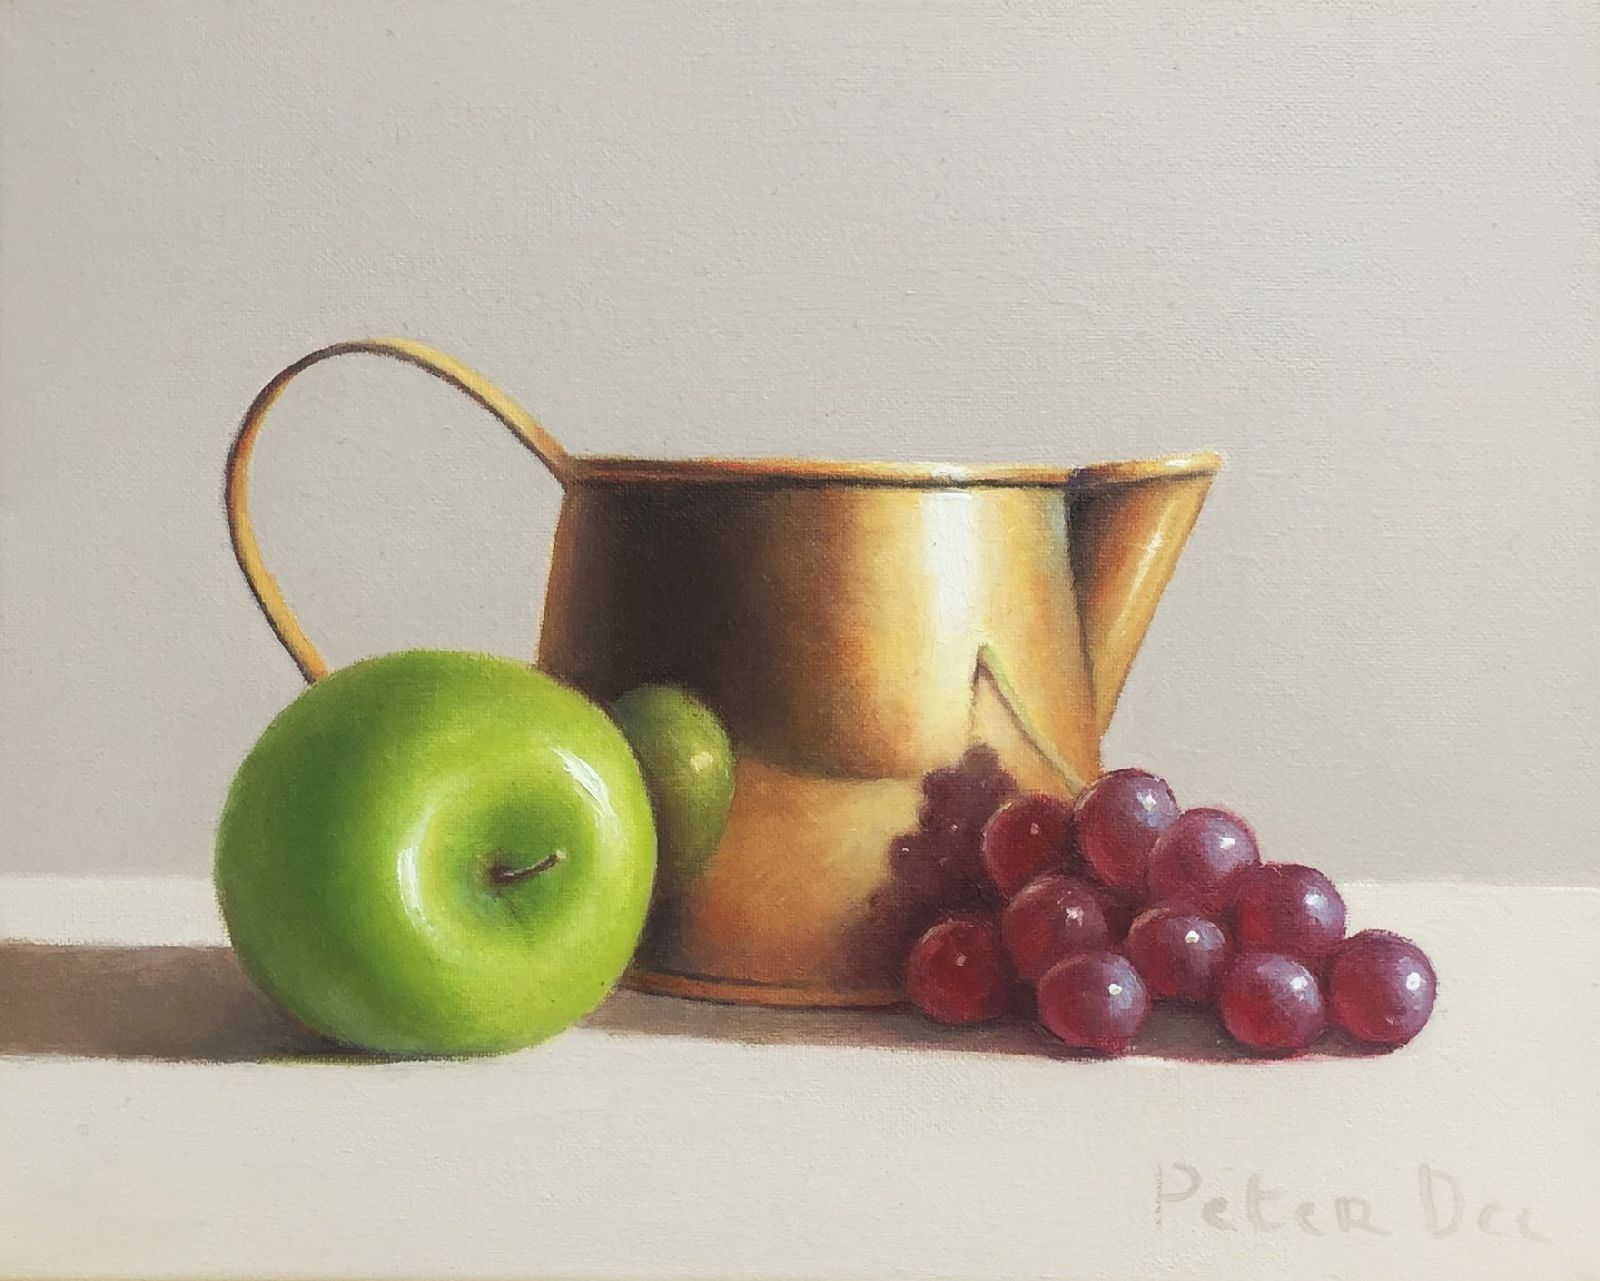 Brass Jug with Fruit by Peter Dee